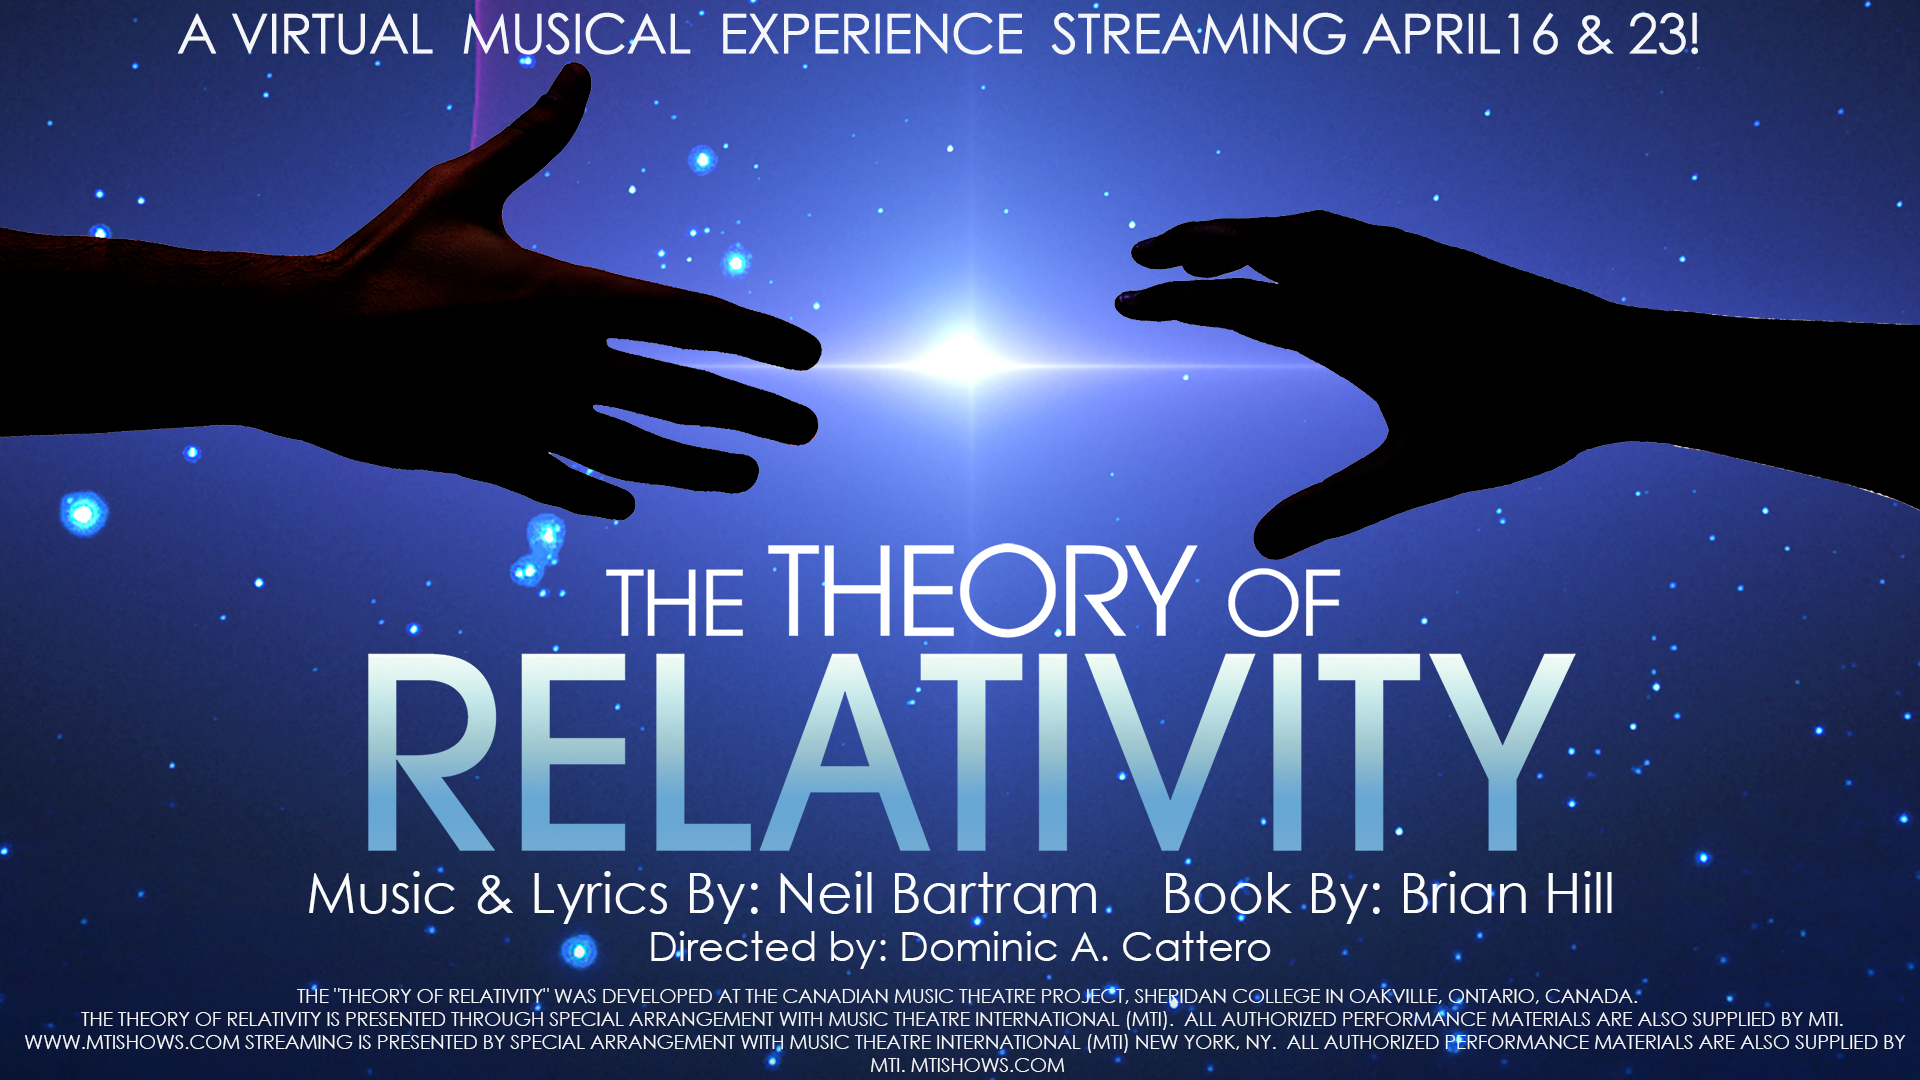 Q&A with “The Theory of Relativity” cast member Erin McLauglin